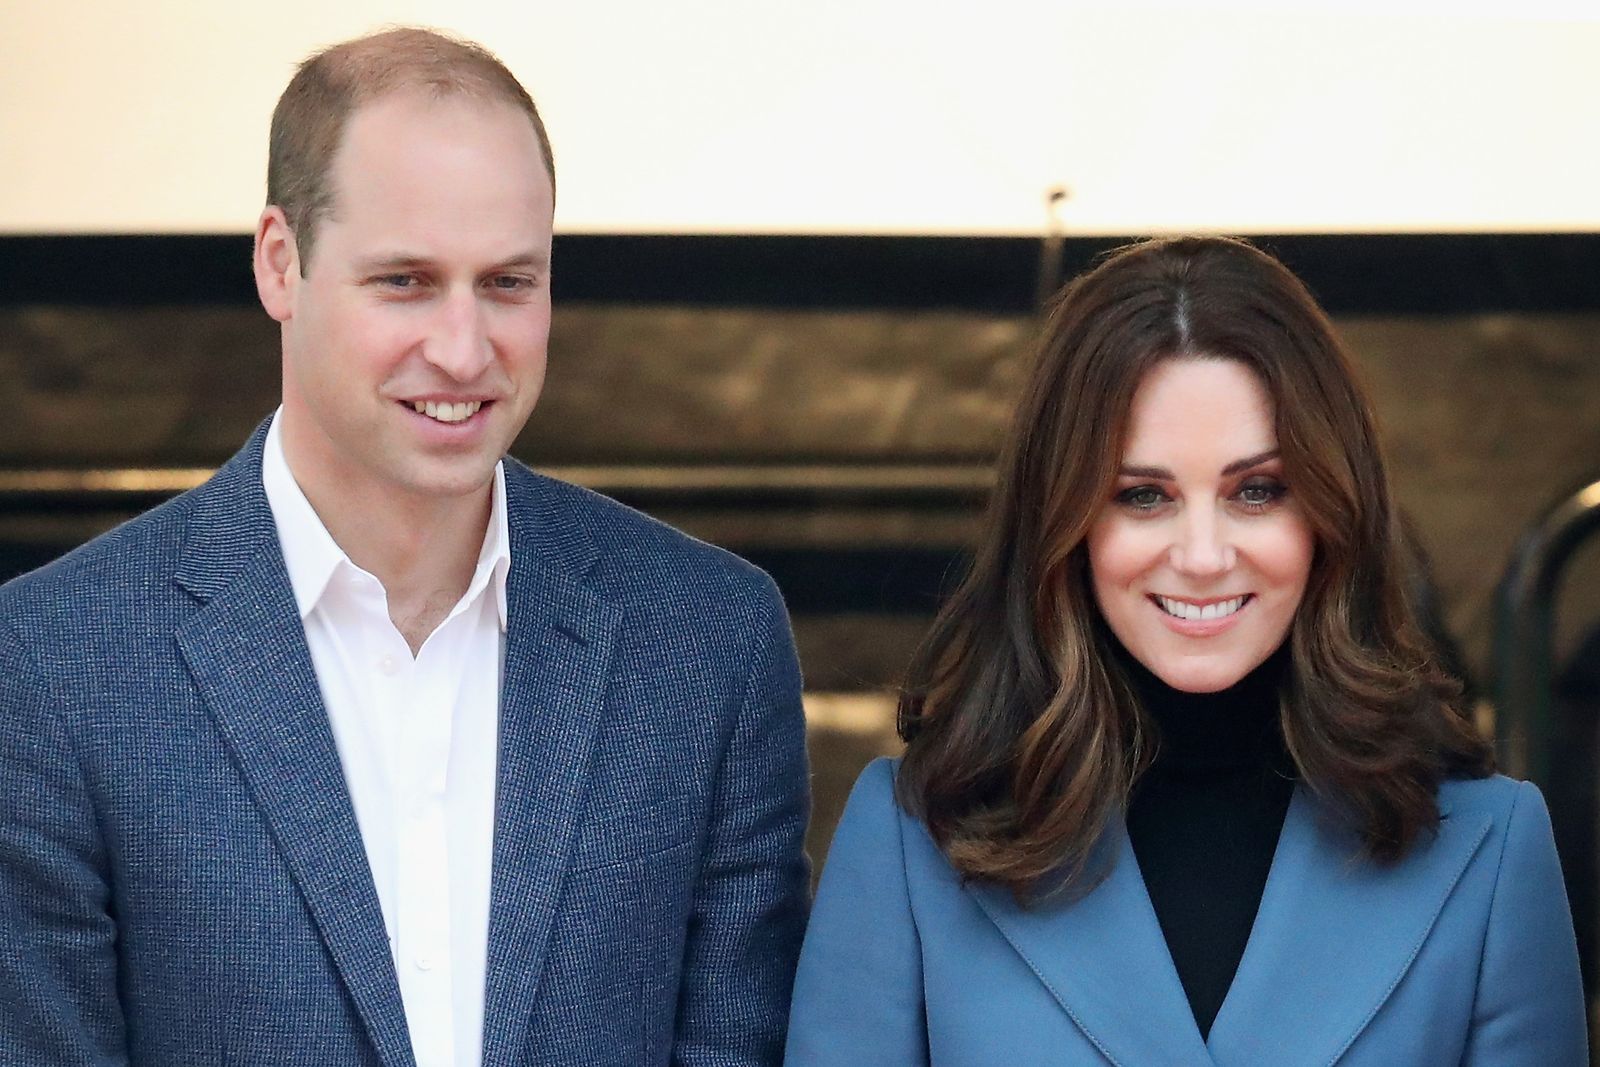 Prince William and Kate Middleton at the Coach Core graduation ceremony for more than 150 Coach Core apprentices at The London Stadium on October 18, 2017 | Photo: Getty Images